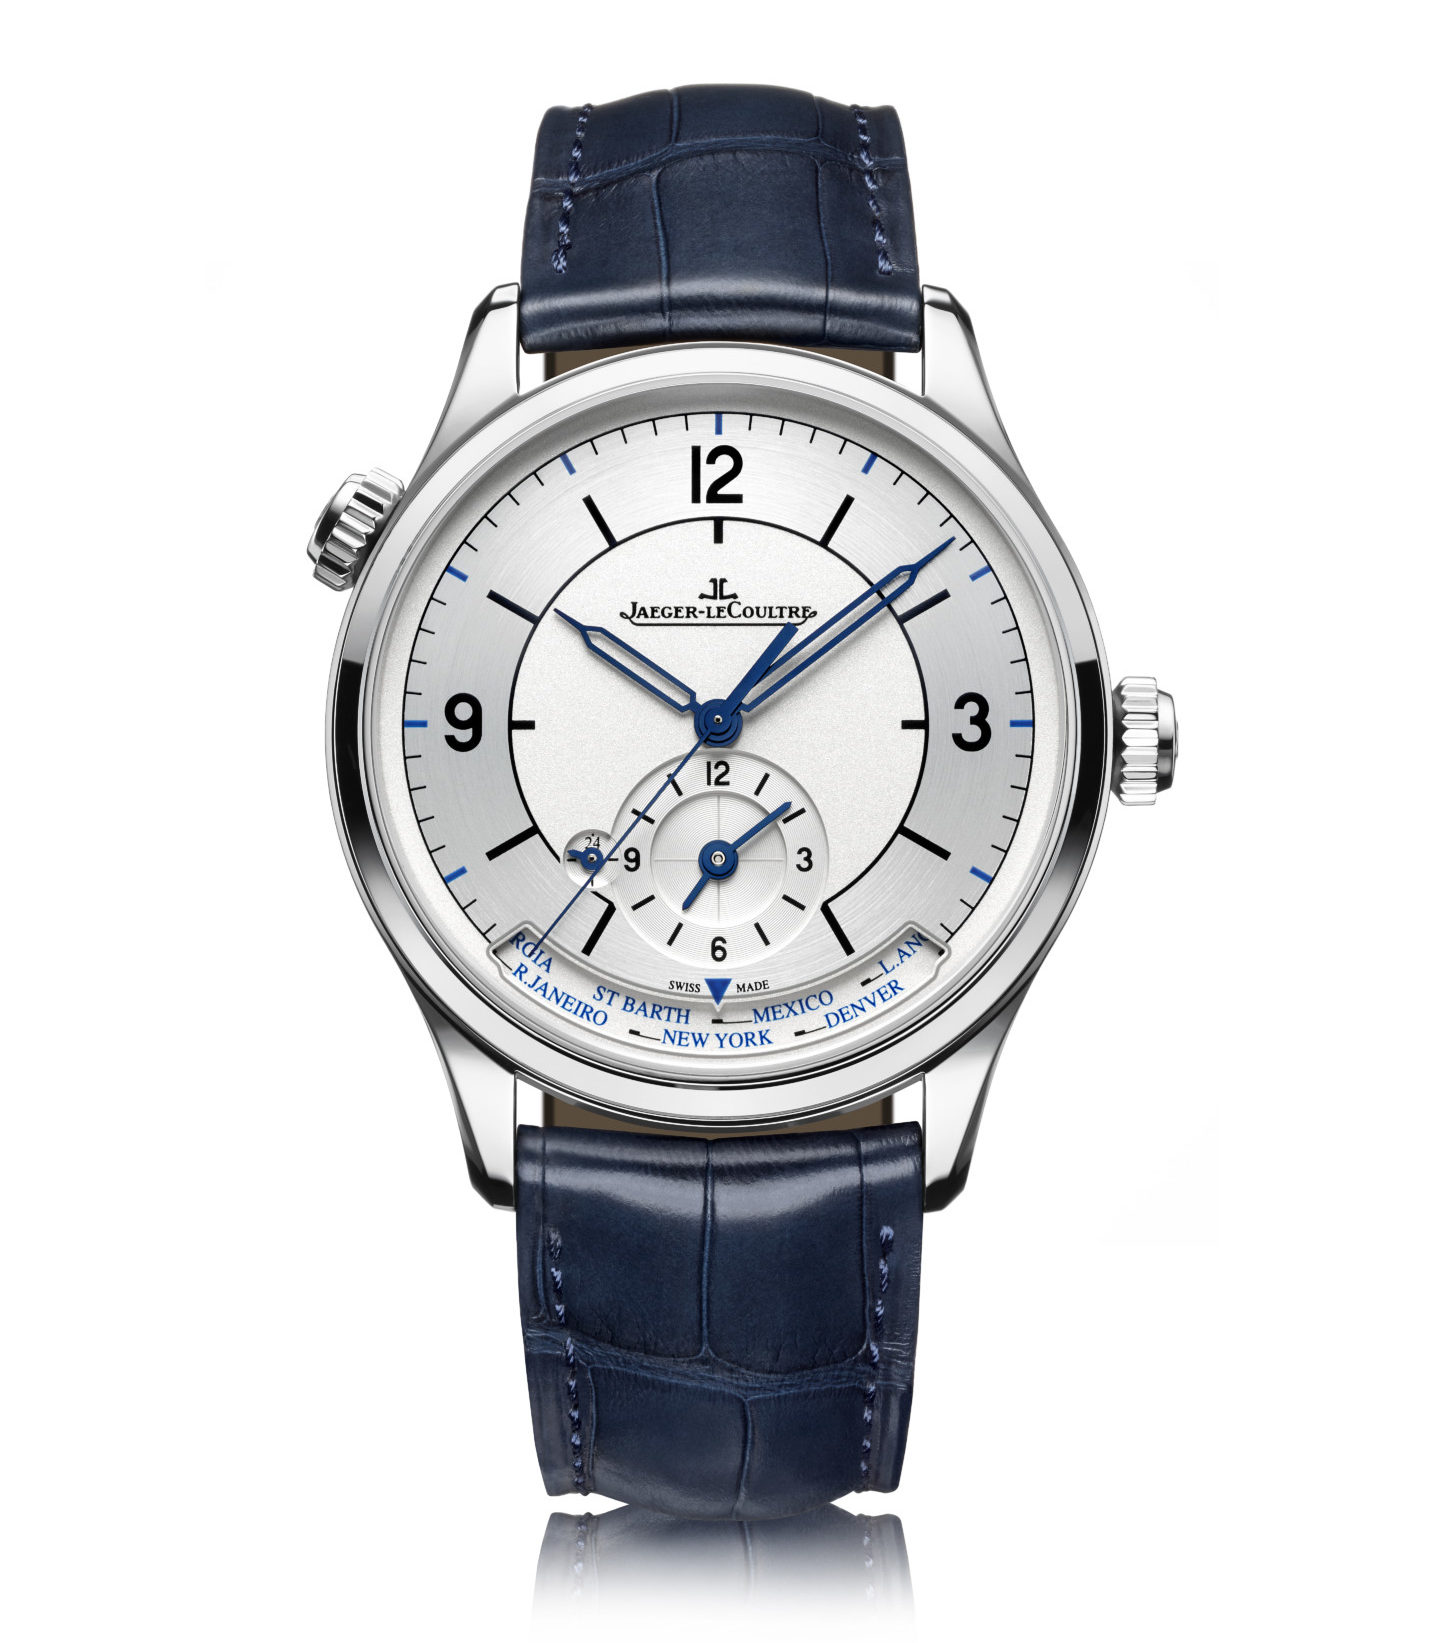 Jaeger-lecoultre master geographic